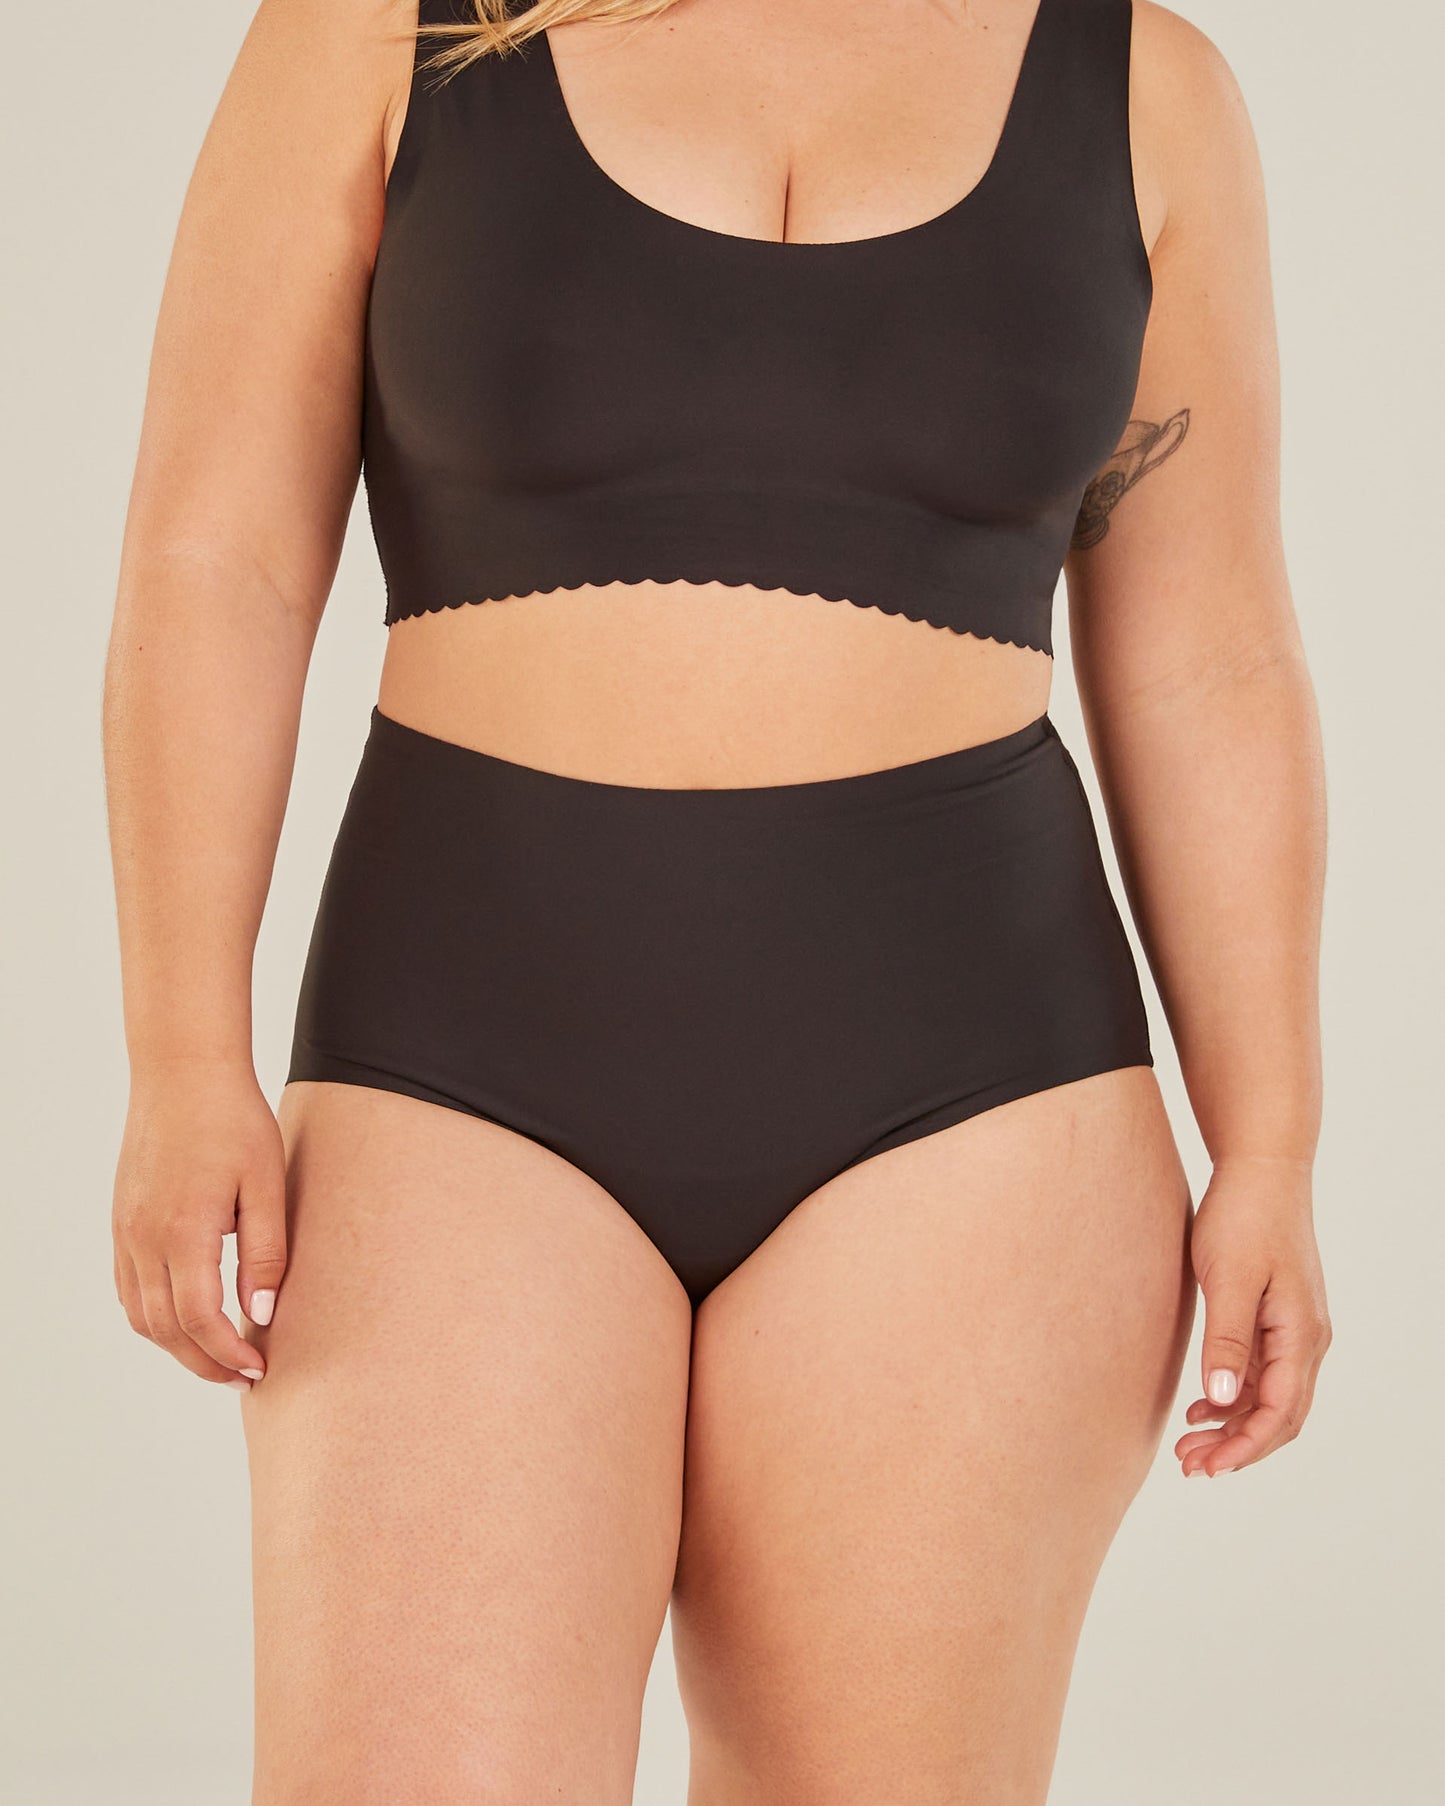 🔥LAST DAY SALE 70%🔥 – High Waisted Tummy Control Pants – Top Swift